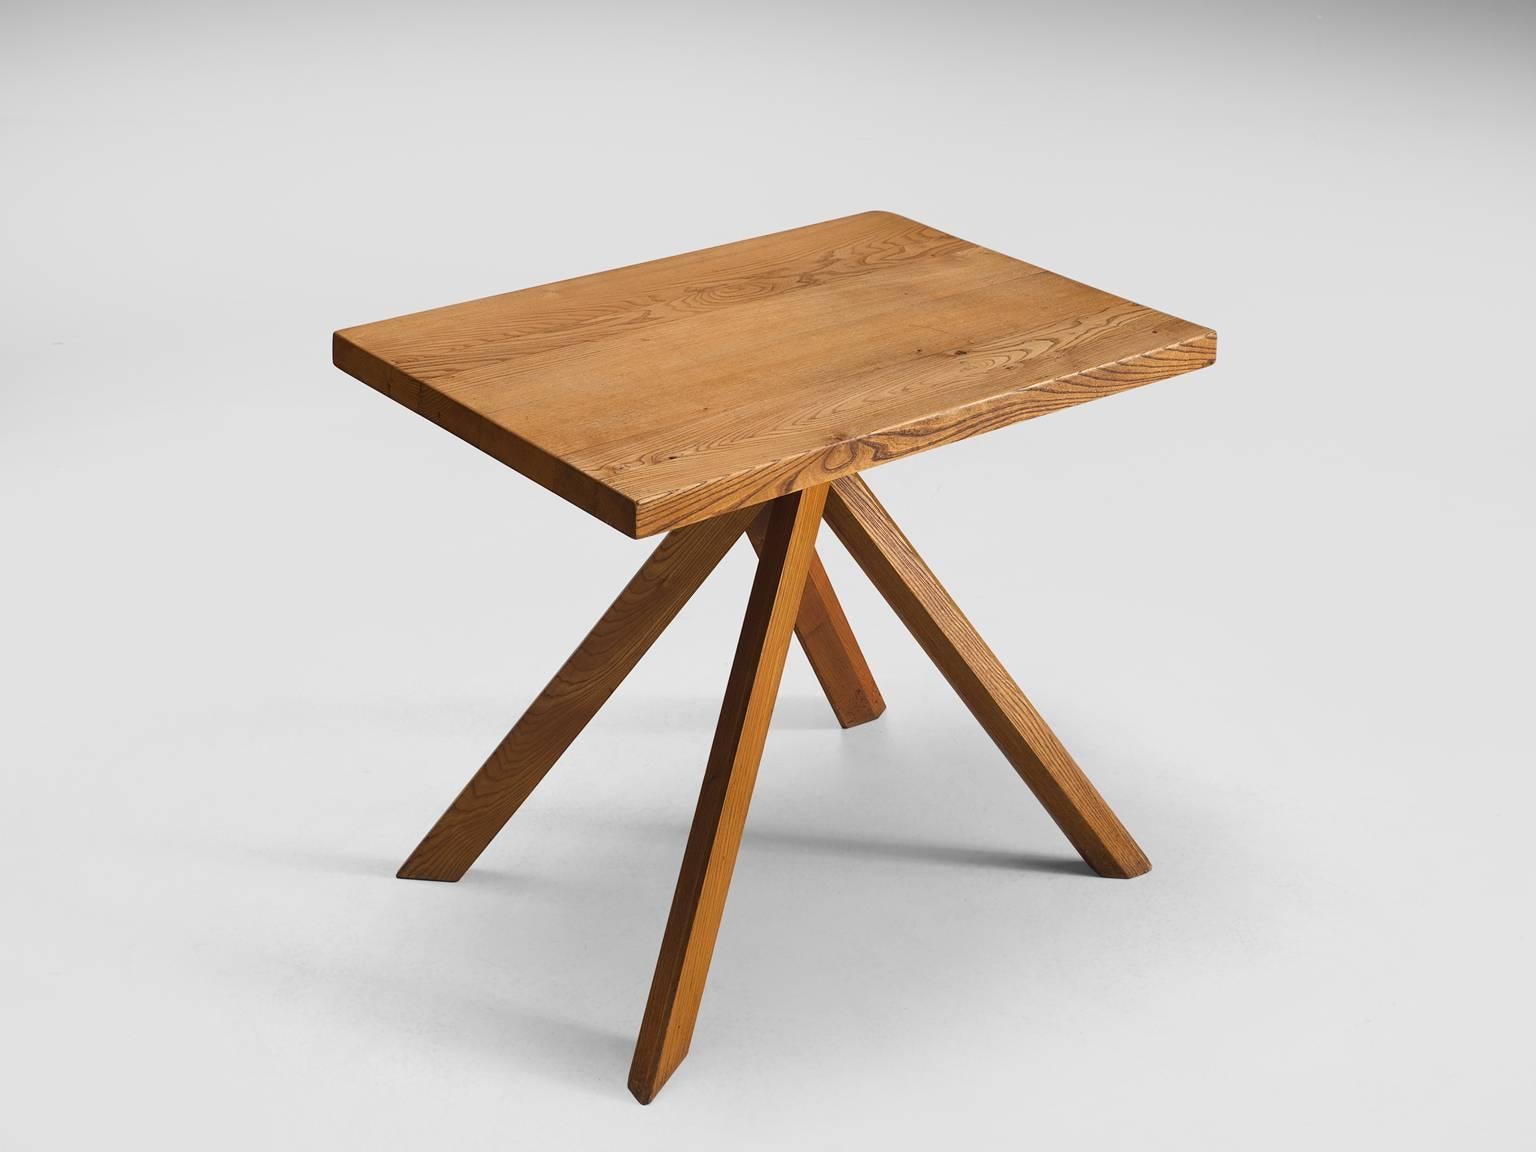 Pierre Chapo, centre and kitchen table, model T27A, elm, France, 1960s.

This small kitchen or dining table in solid elm by master woodworker Pierre Chapo is name 'Rectangulaire Duo' and is type T27A. The basic design and construction as well as the